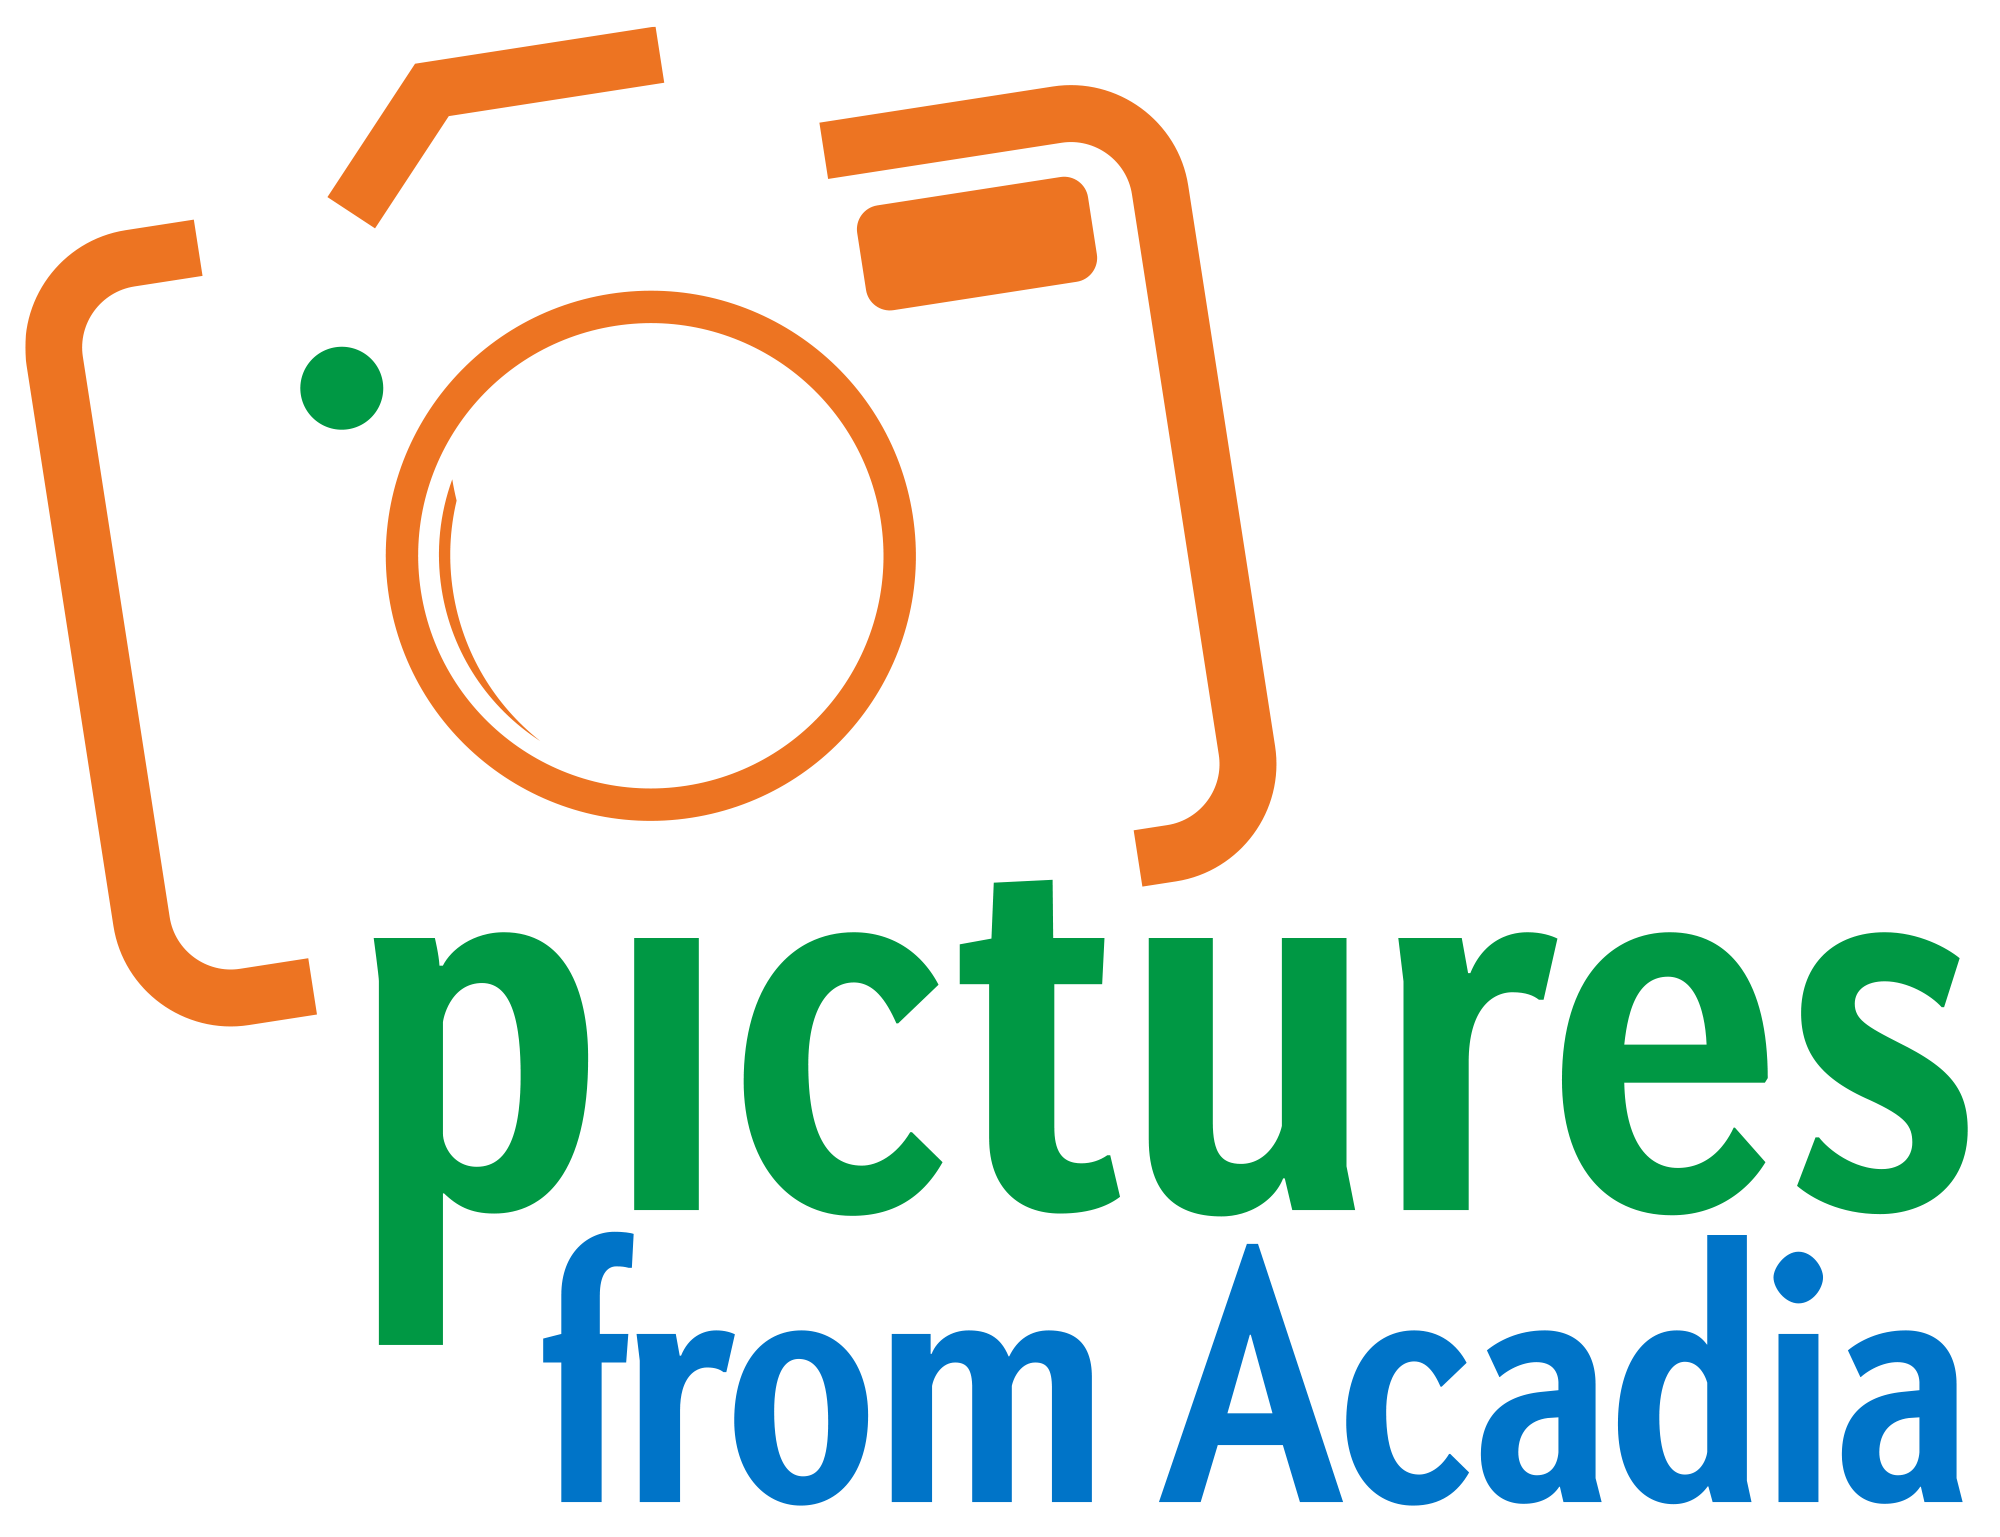 Image of logo for pictures from Acadia